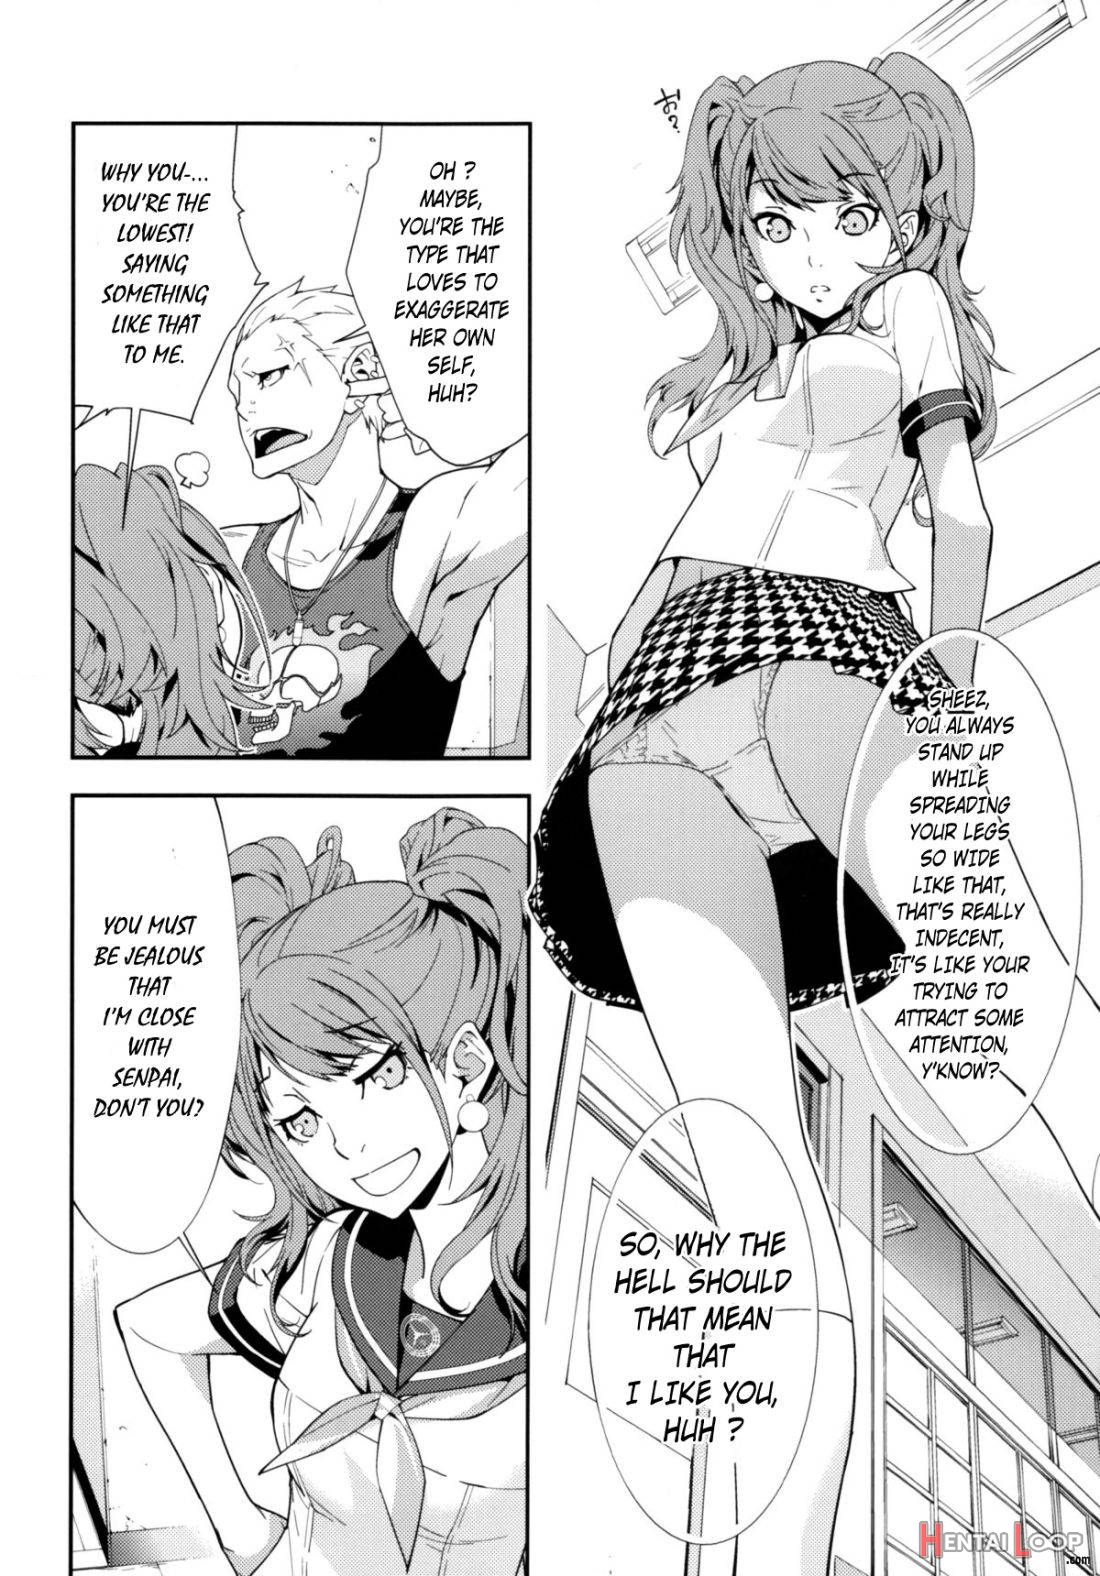 Rise Sexualis 2 page 3